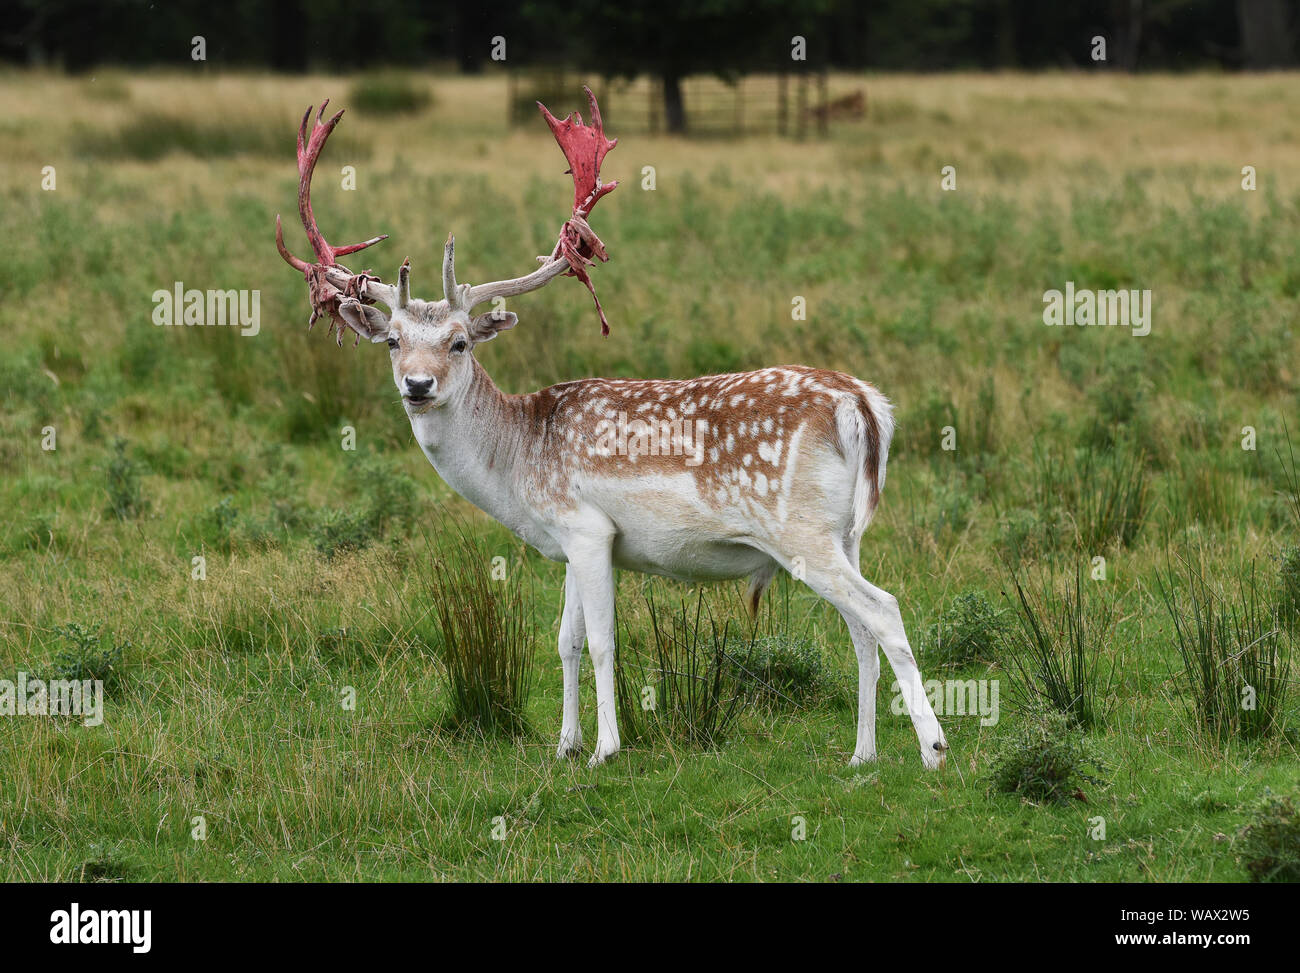 Attingham Park, Shropshire, Uk 22nd August 2019 Oh deer! A fallow deer buck looking a little gory after shedding the velvet skin covering from his antlers in preparation for the rutting season at Attingham Park in Shropshire. The deer grow new antlers every year and the skin supplies nutrients and blood flow to the growing antler bone underneath. Credit: David Bagnall/Alamy Live News Stock Photo